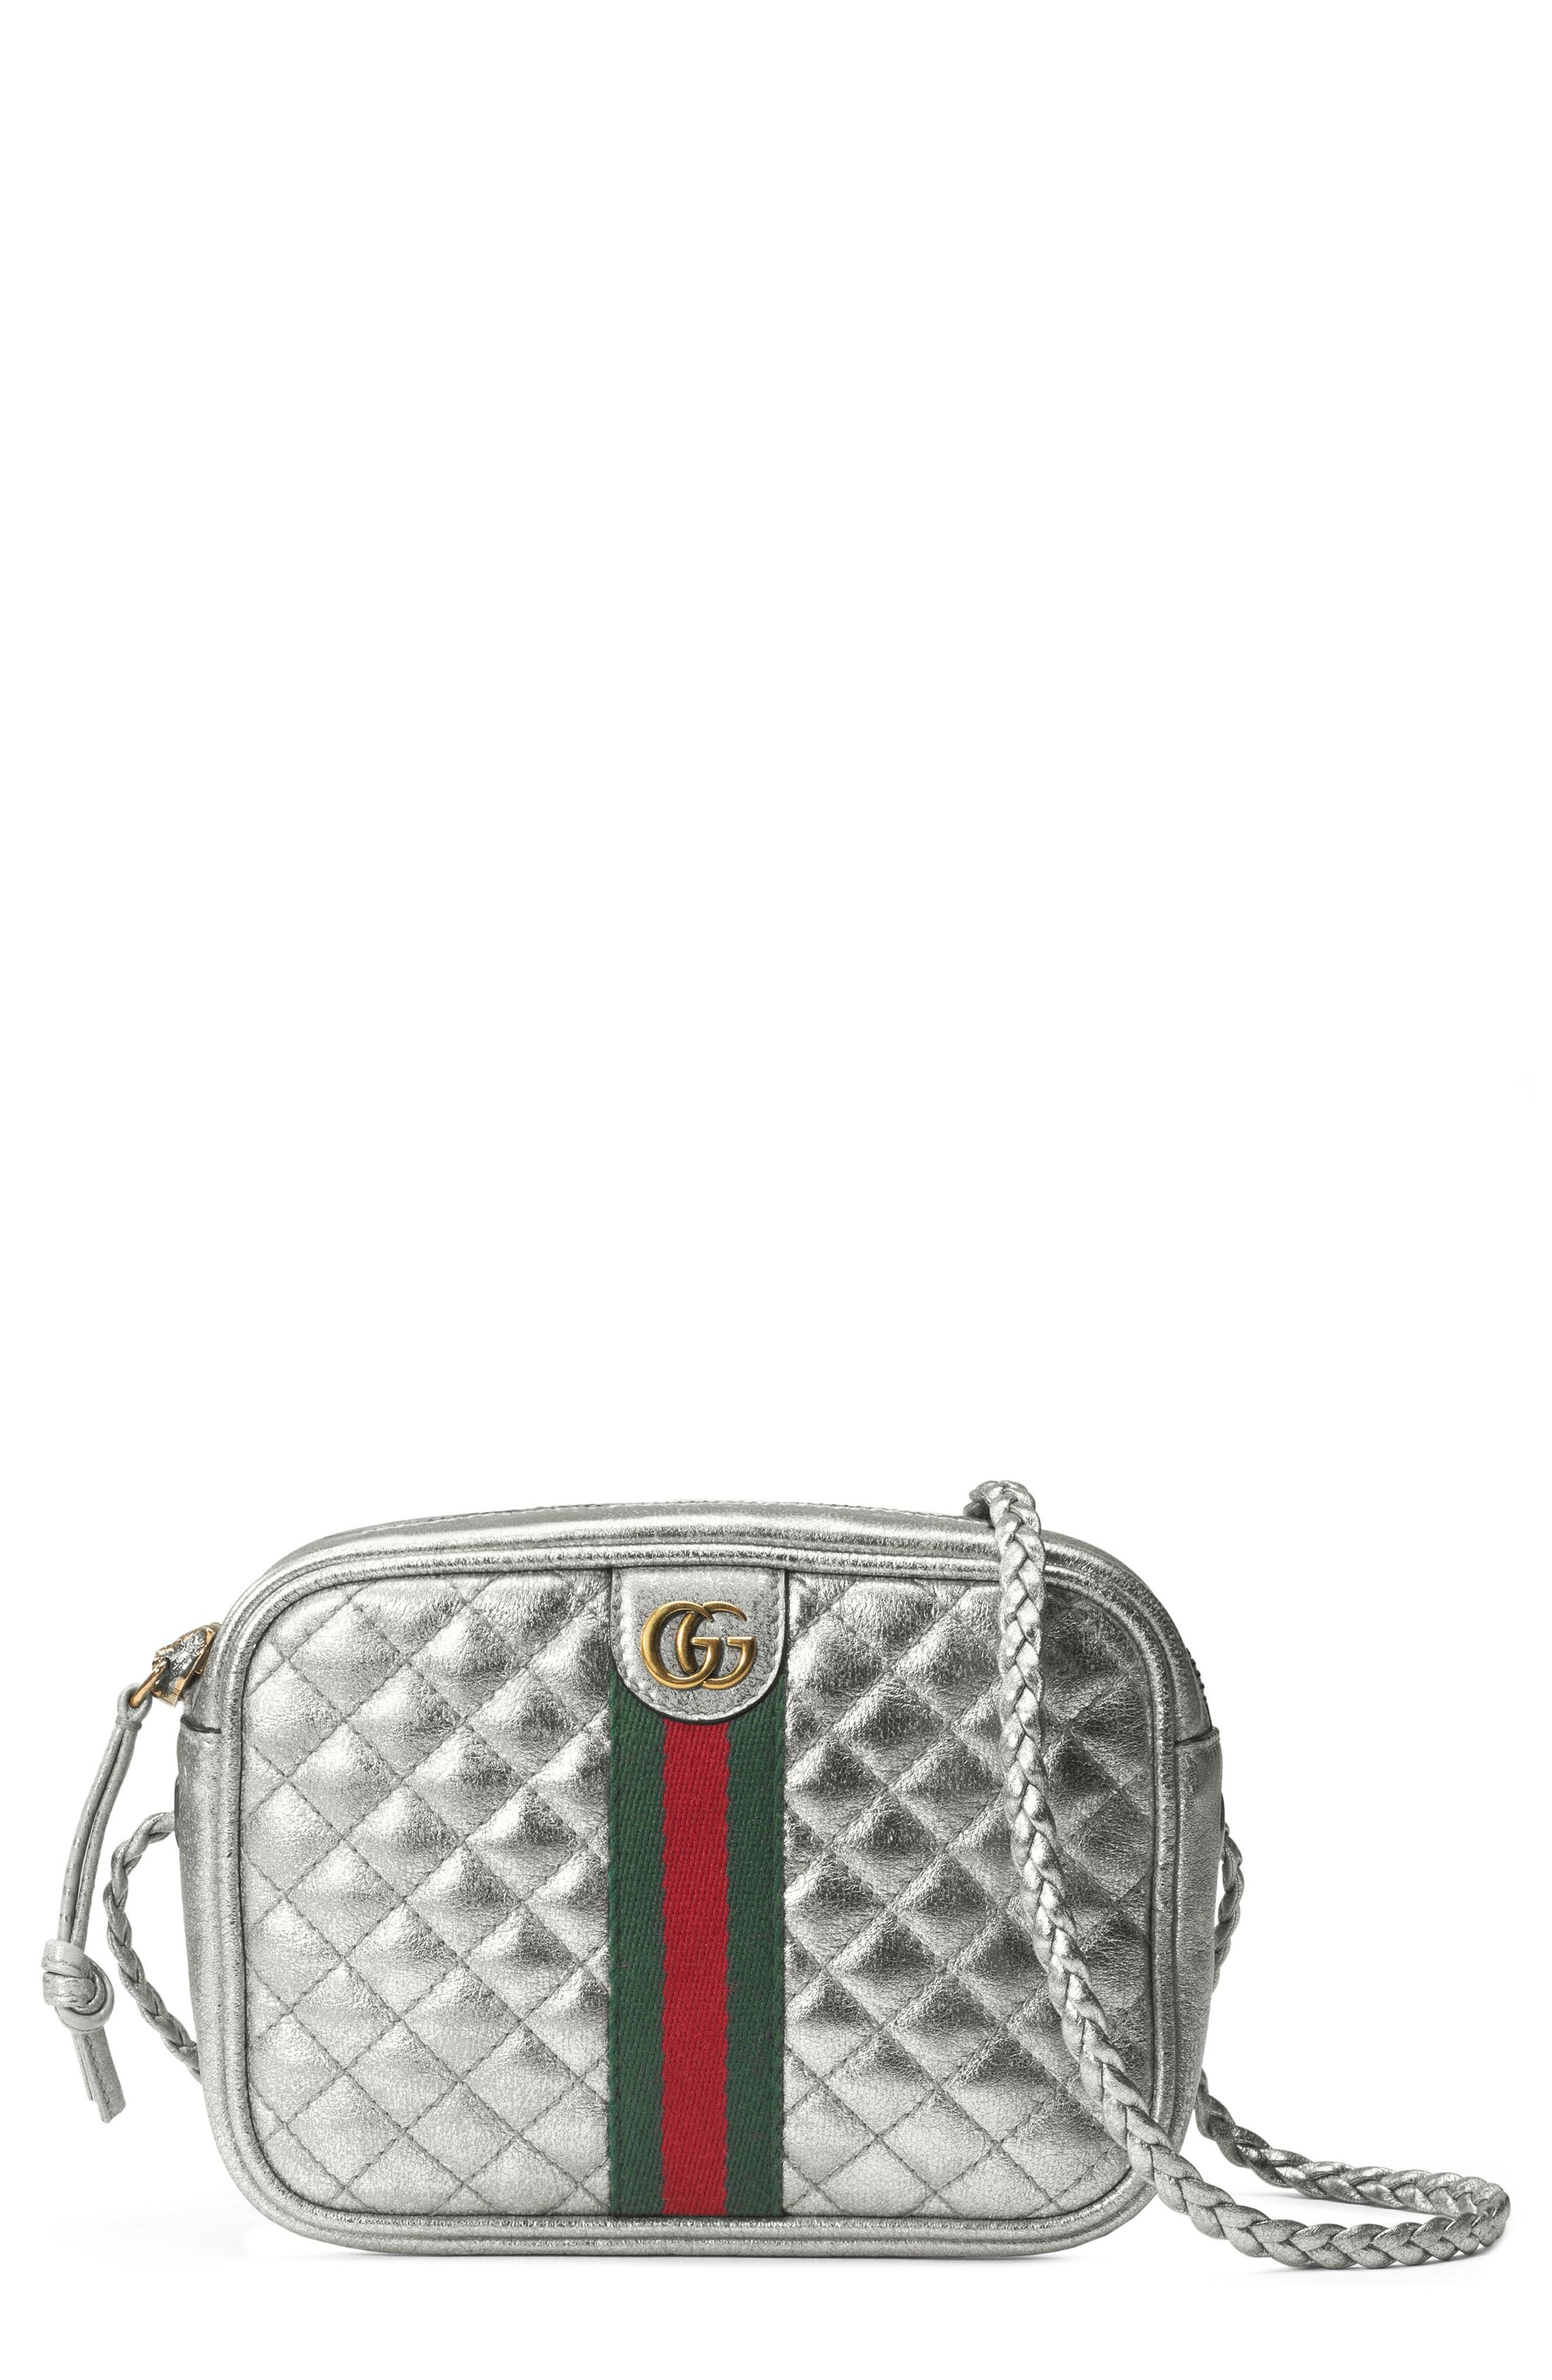 Gucci Quilted Metallic Leather 